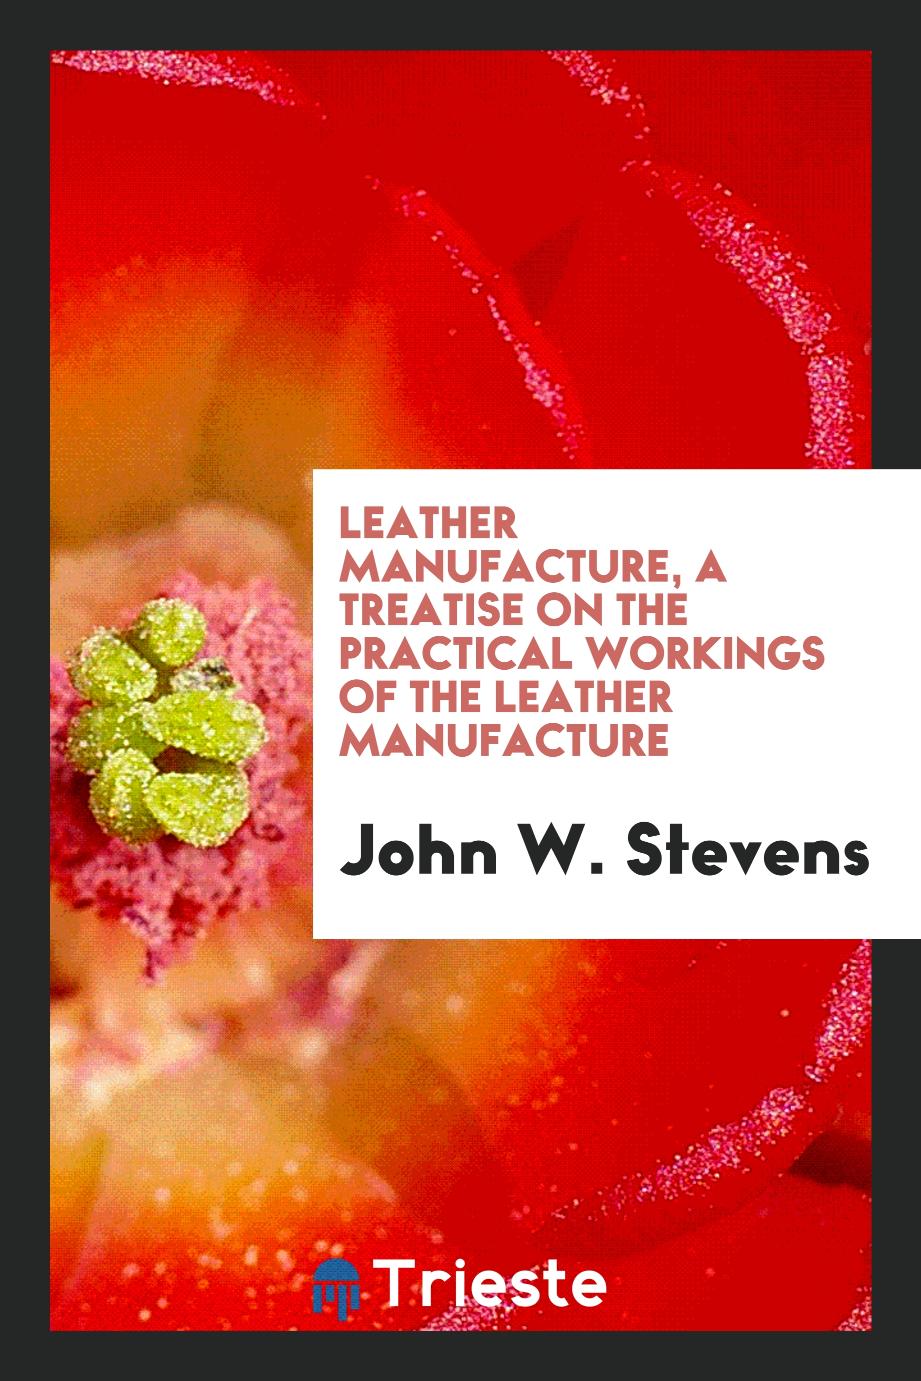 Leather manufacture, a treatise on the practical workings of the leather manufacture